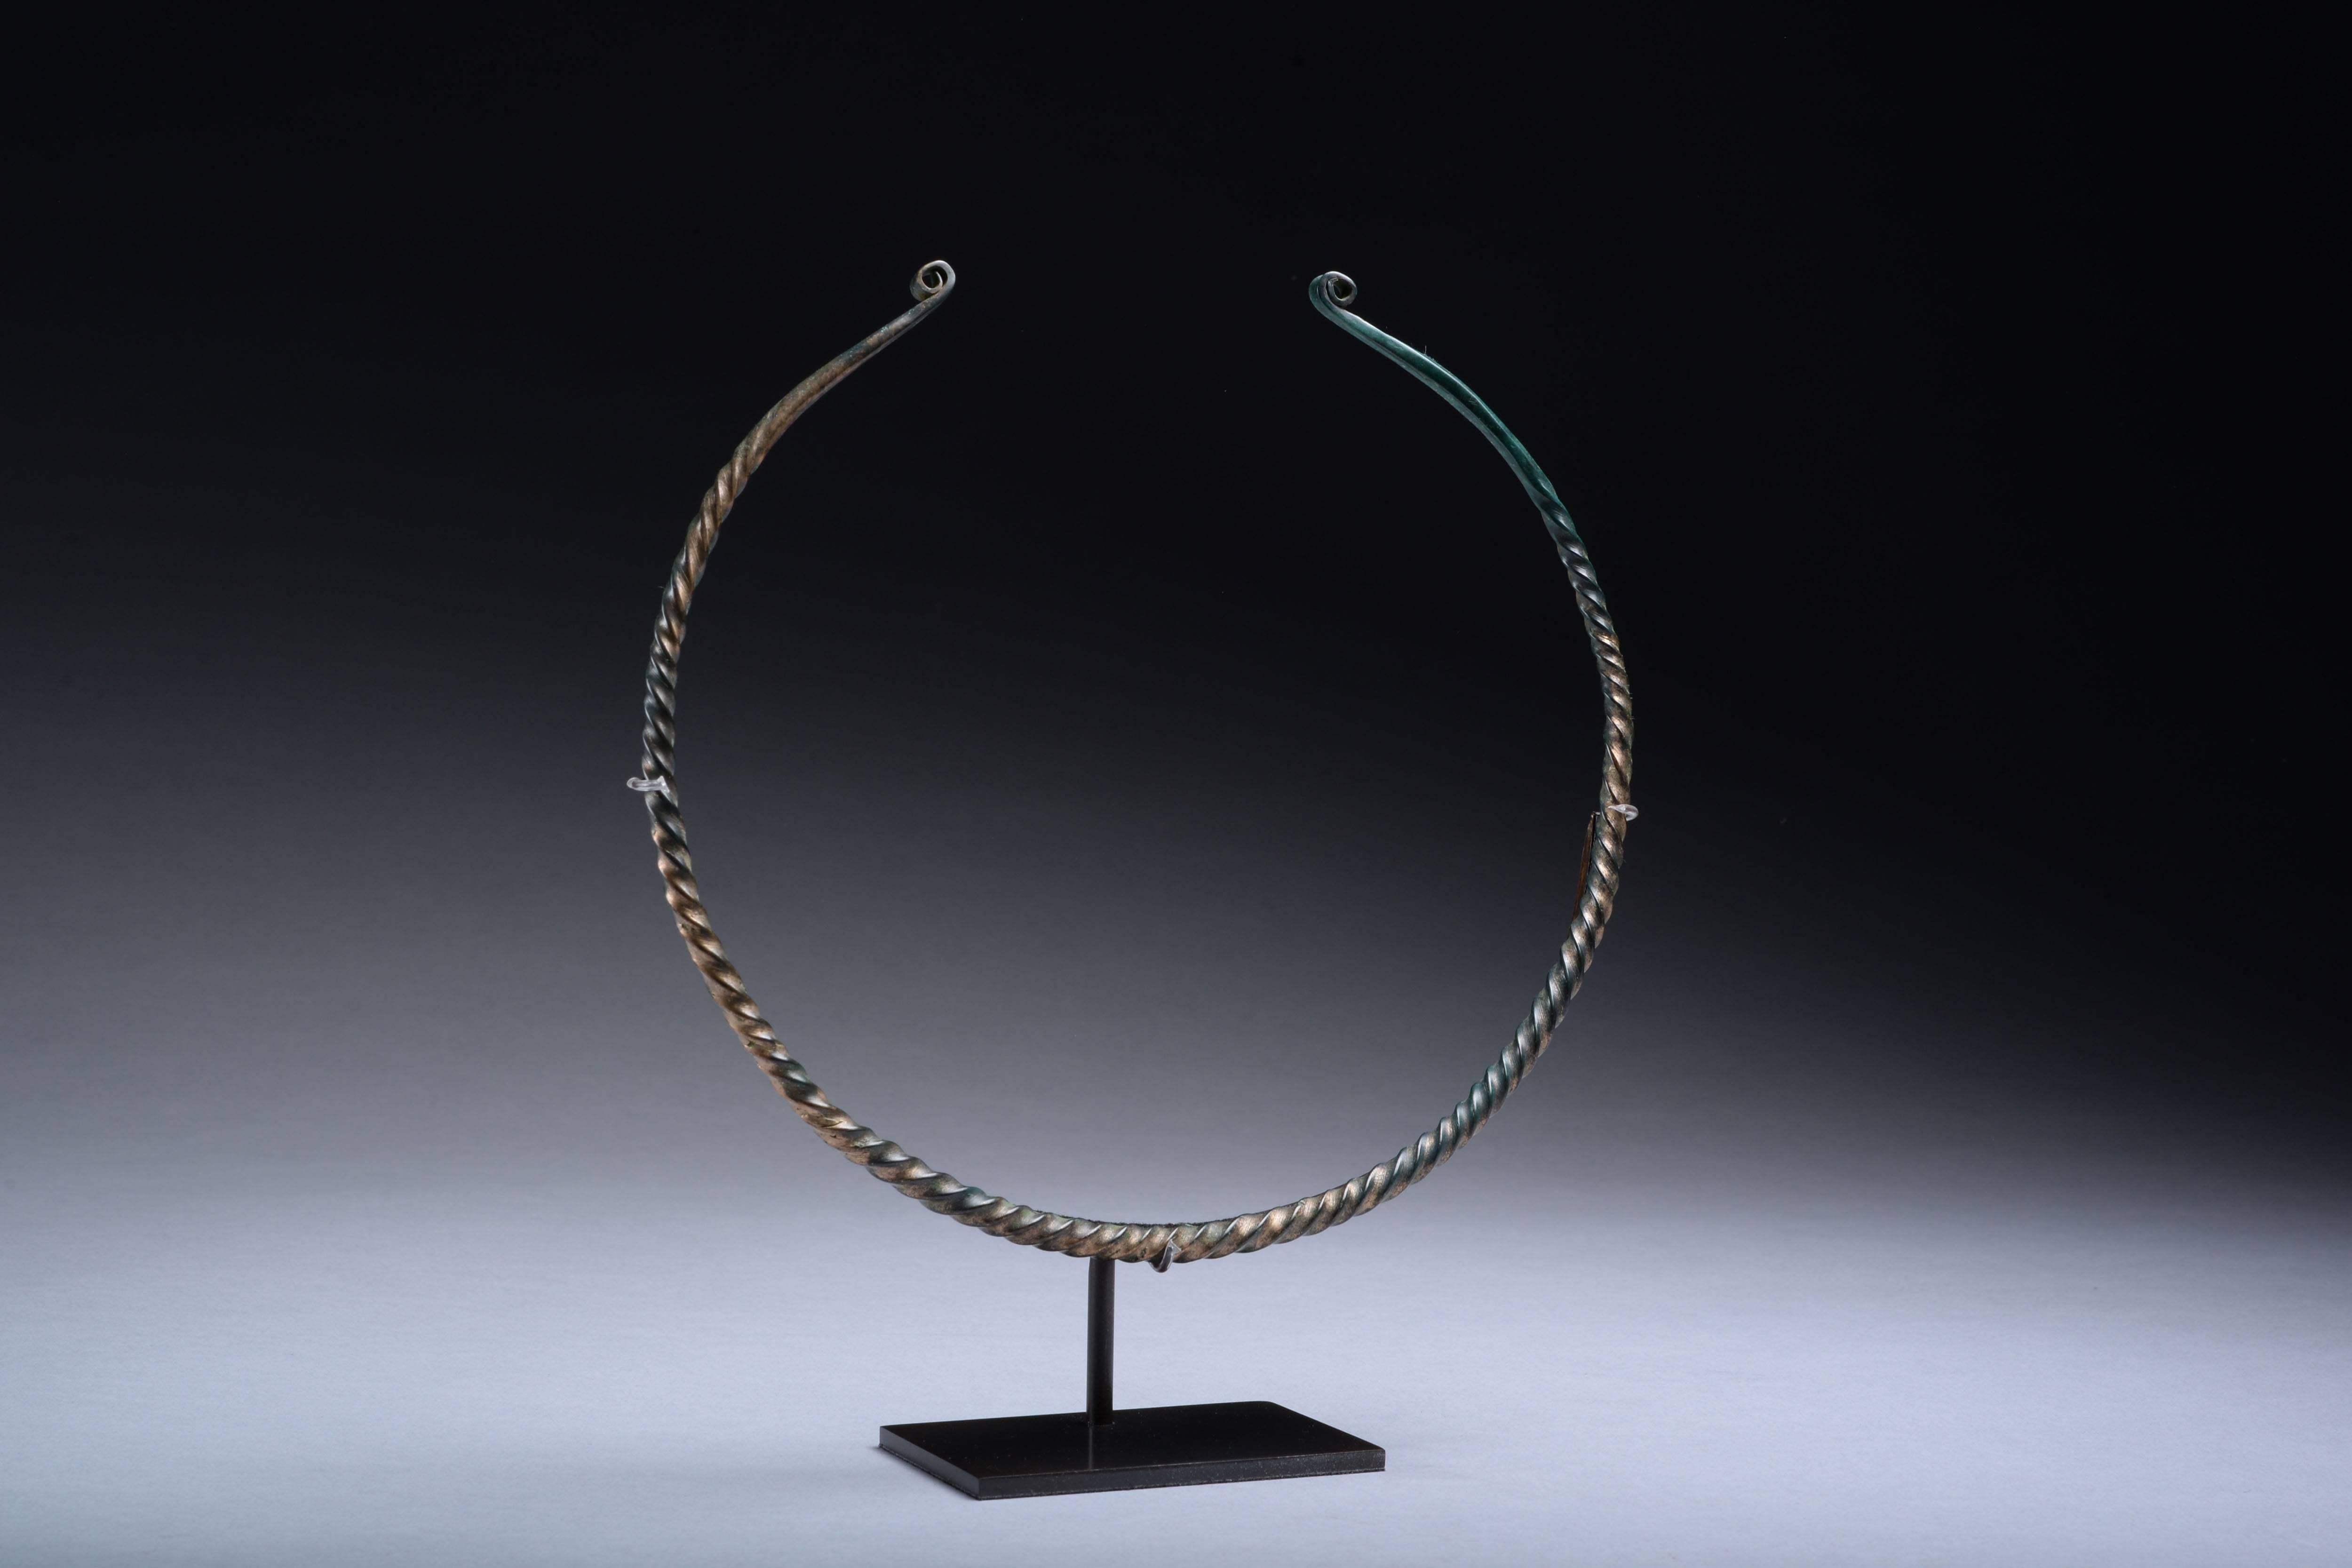 A striking European copper alloy neck torc, dating to the 9th-6th century BC.

Of elegant penannular form, twisted body and coiled terminals, displaying a marvellous green patina.

Torcs were status objects worn around the neck by the pre-Roman